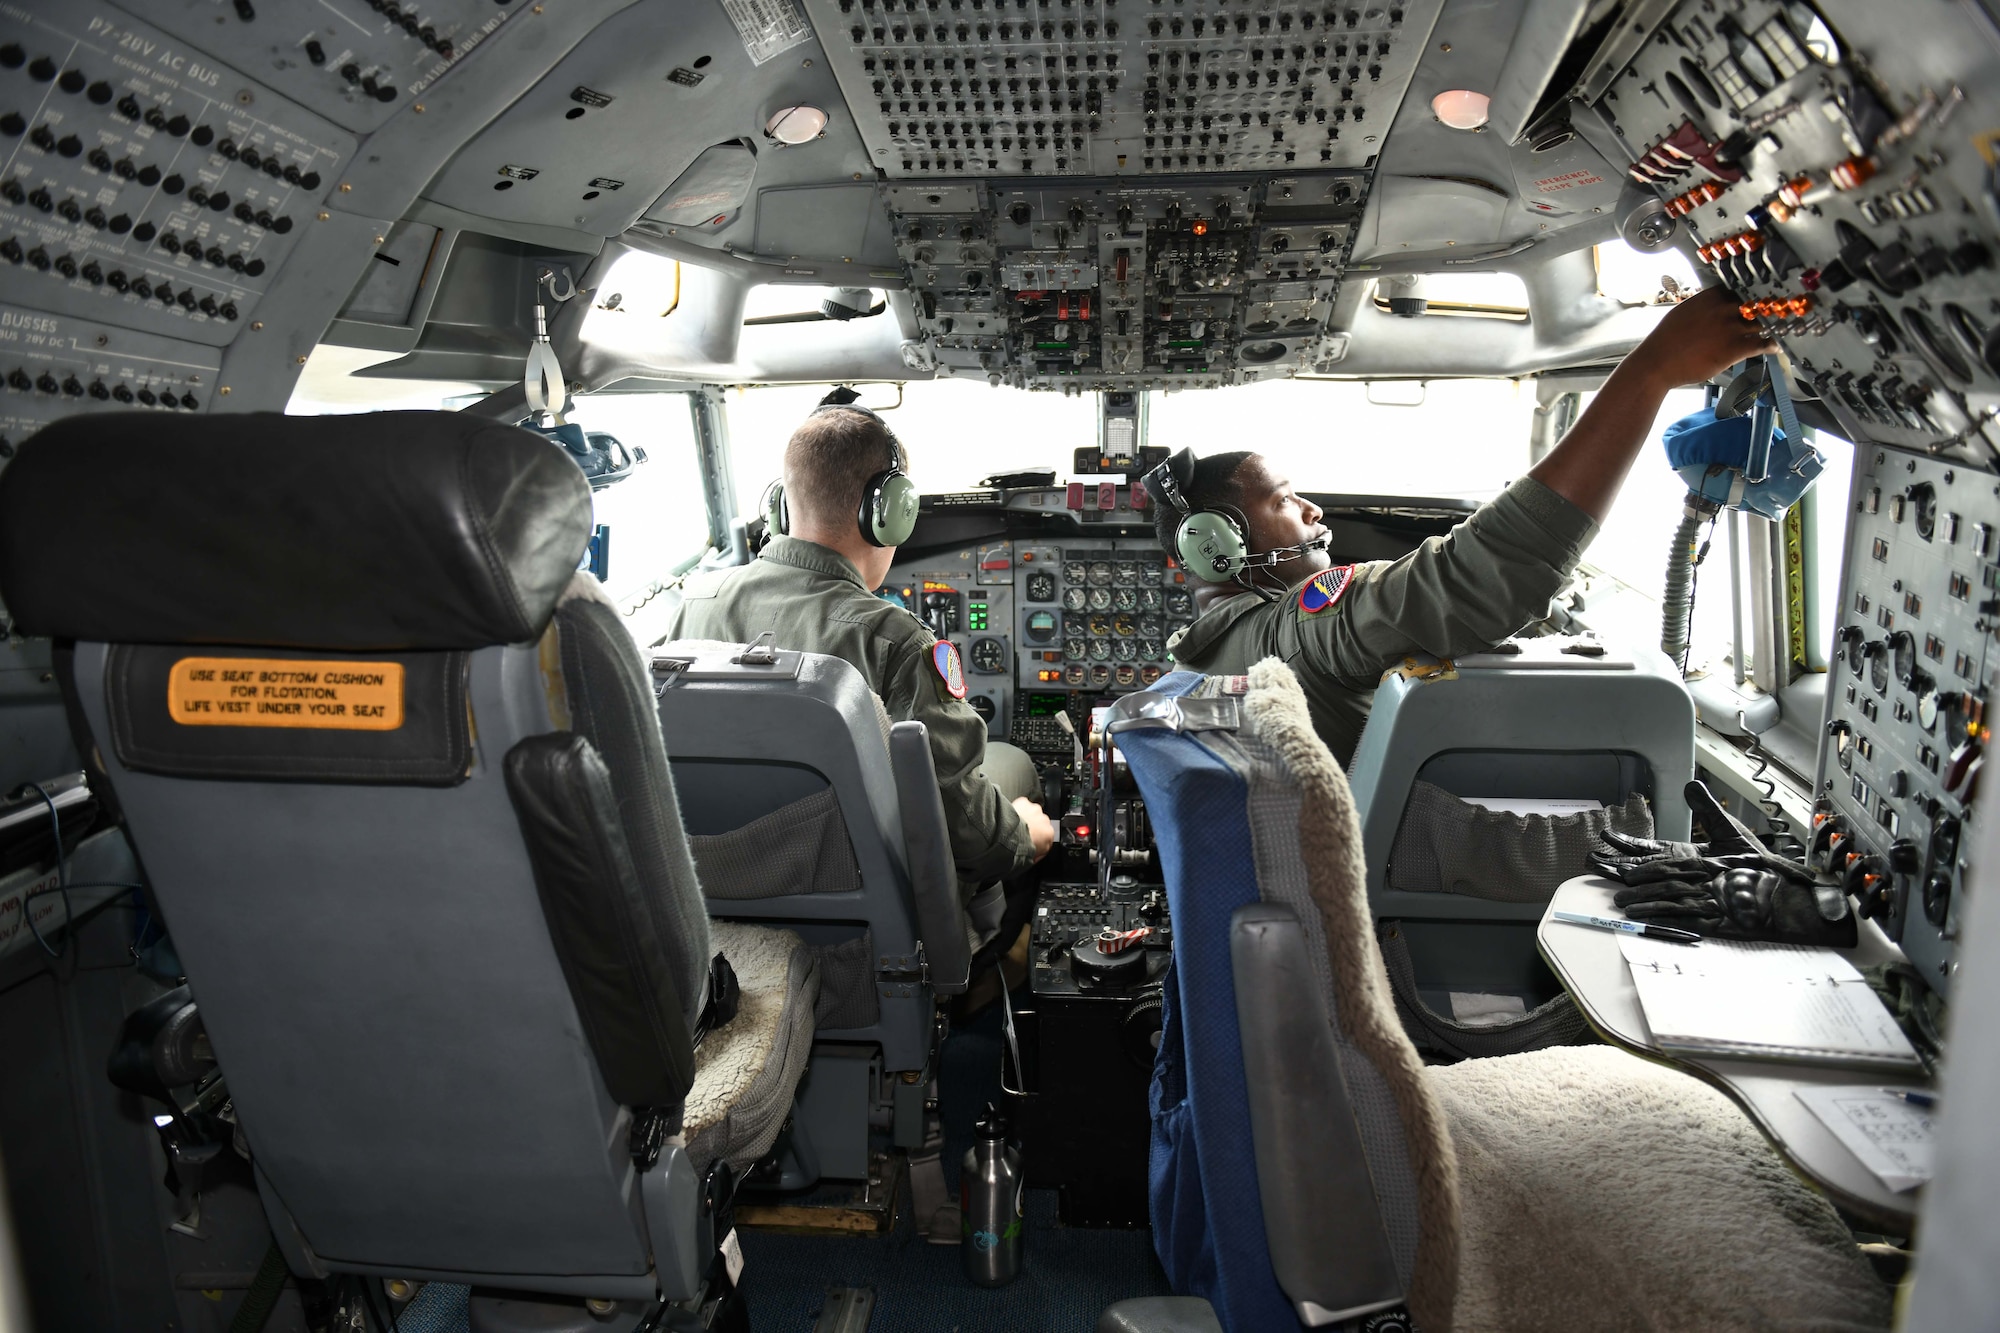 Photo shows two Airmen in the cockpit of an aircraft.